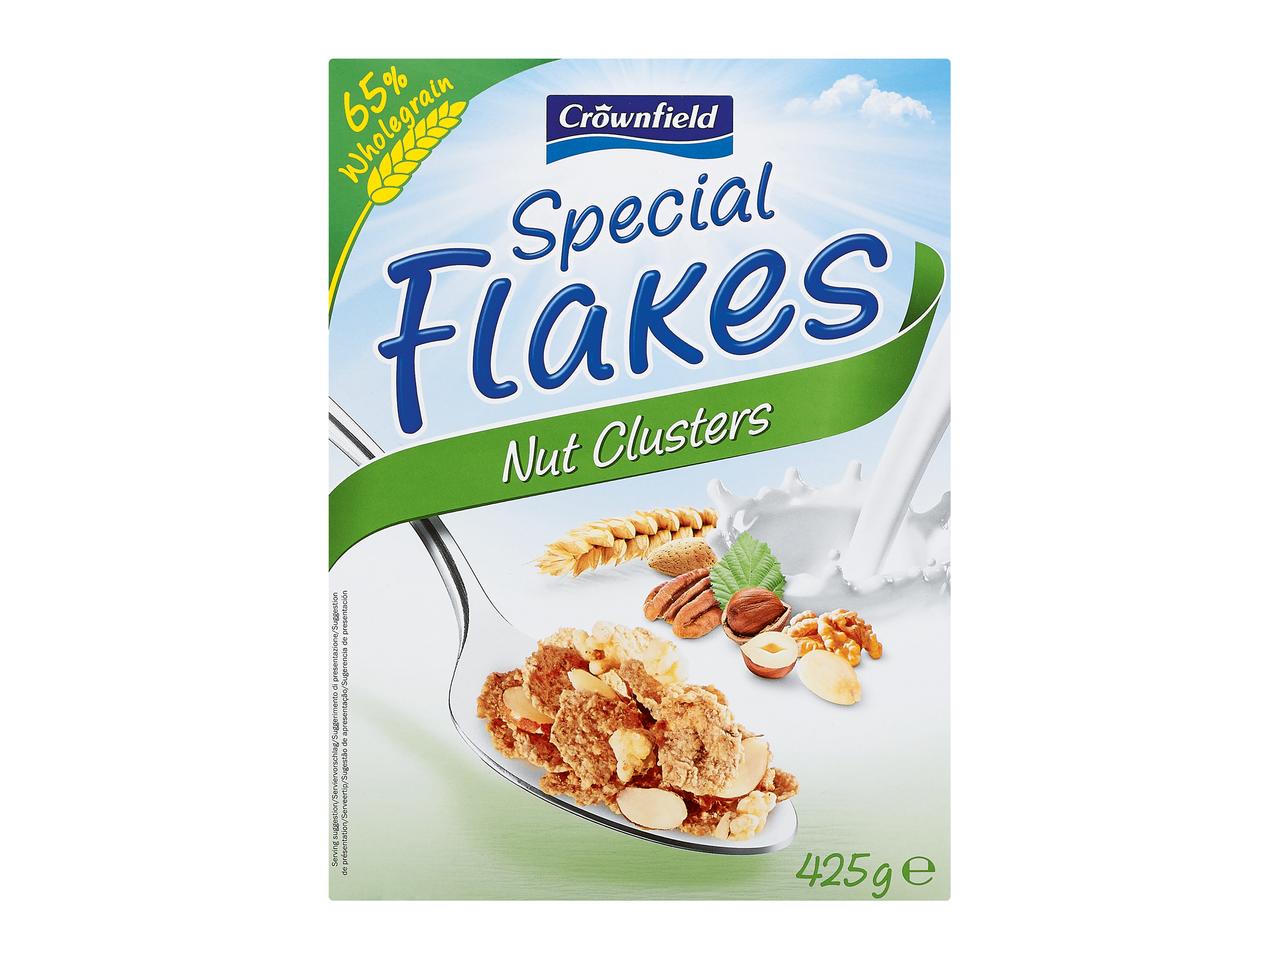 Special flakes